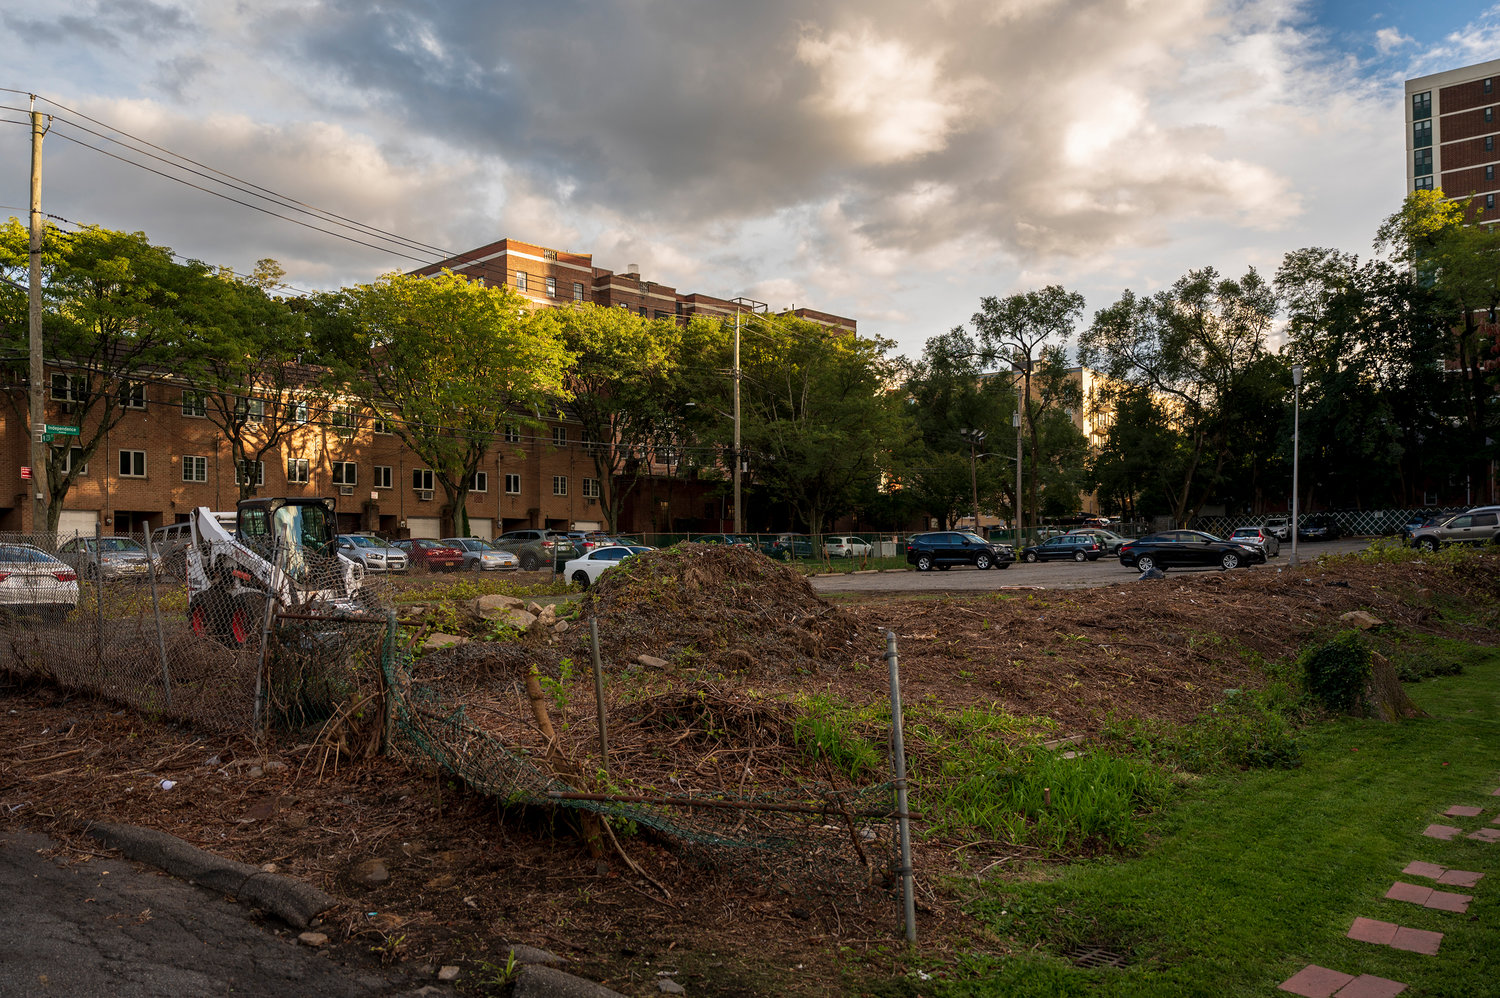 Landscaping equipment and a pile of earth remain after excavation work at a parking lot used by the Schervier Rehabilitation and Nursing Center's staff at the intersection of Independence Ave and W 231st St on Wednesday, September 28, 2022.